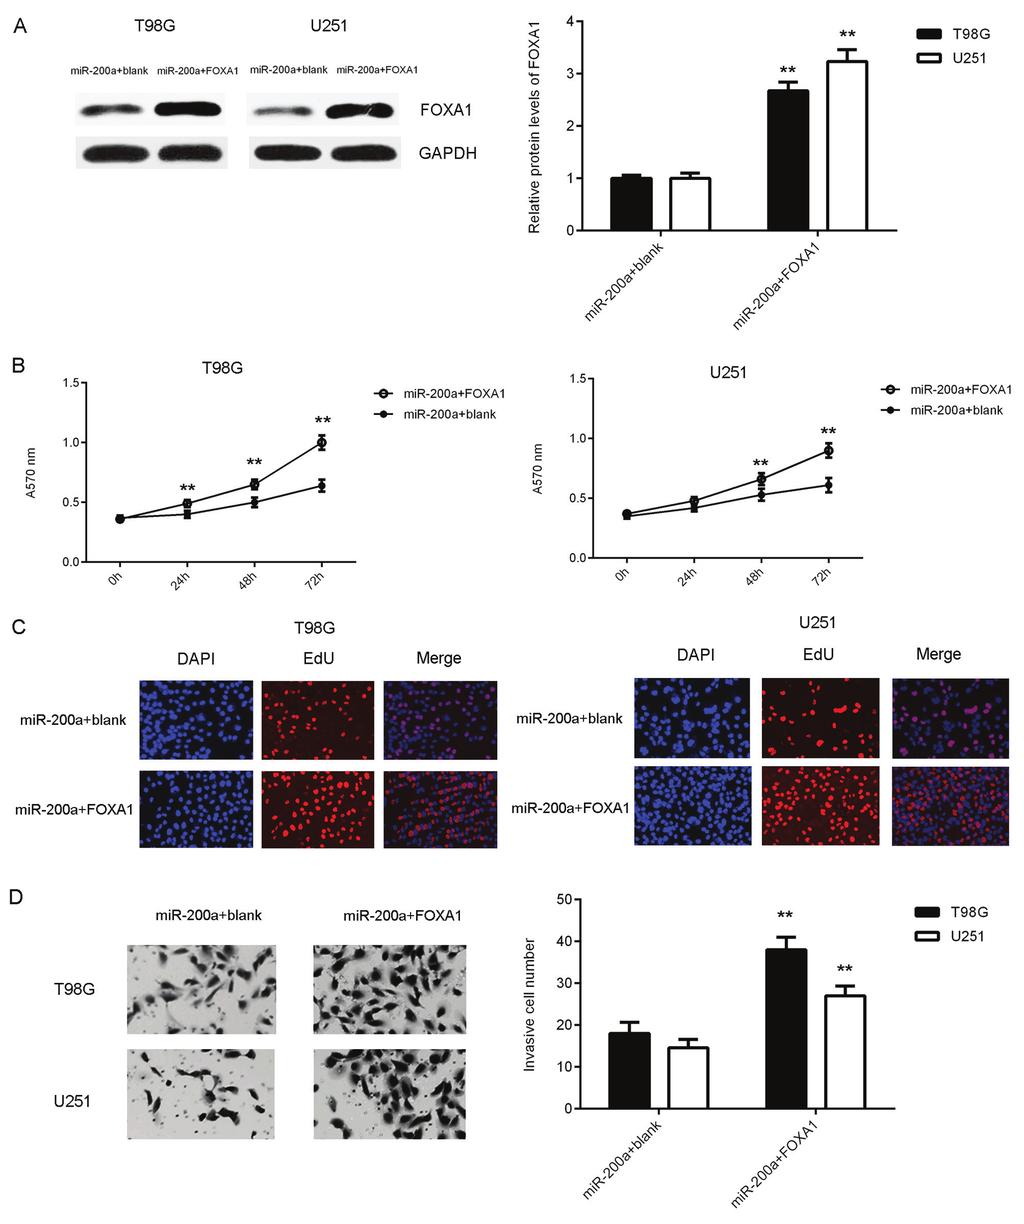 8 CHEN et al: mir-200a INHIBITS GLIOMA VIA FOXA1 Figure 6. T98G and U251 cells which overexpressed mir 200a were transfected with a FOXA1 expression plasmid or blank vector.